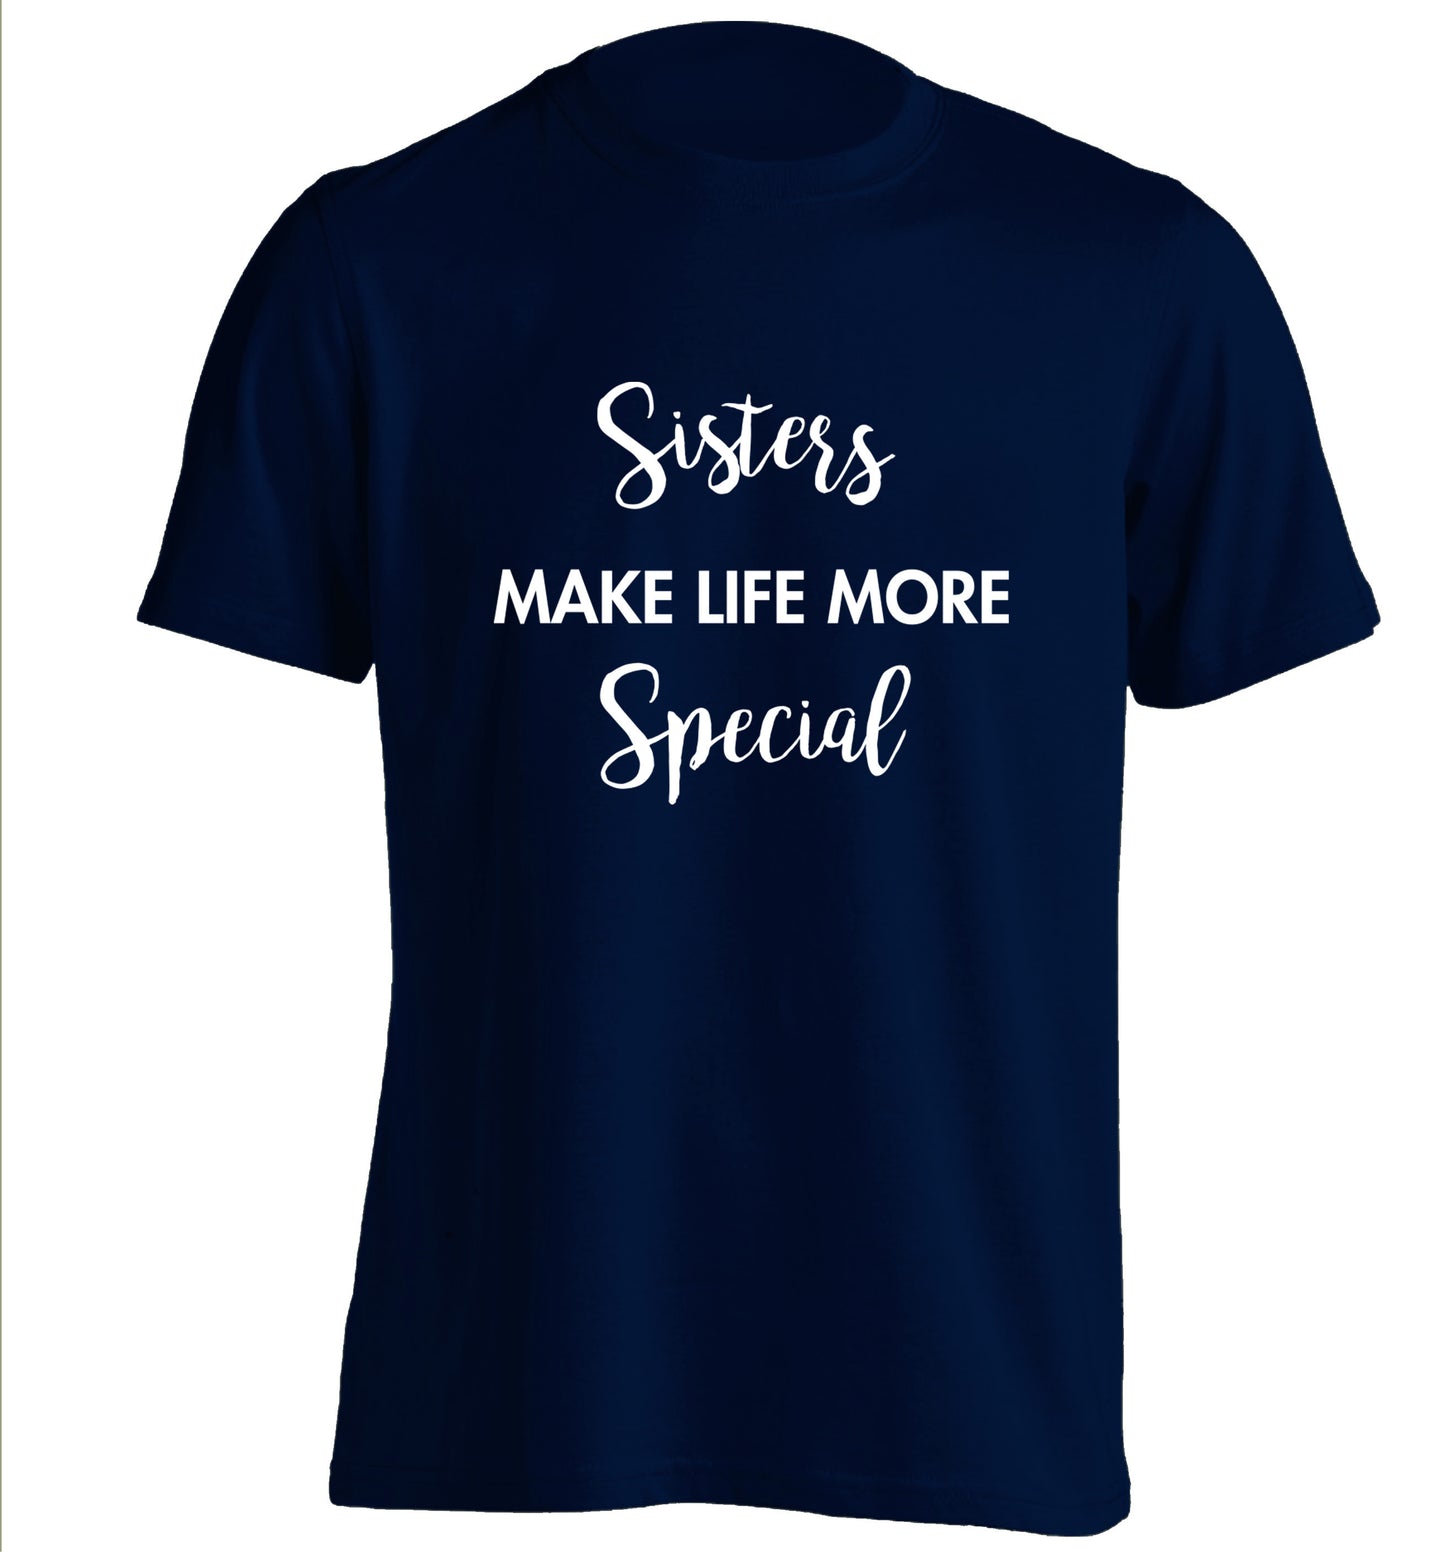 Sisters make life more special adults unisex navy Tshirt 2XL